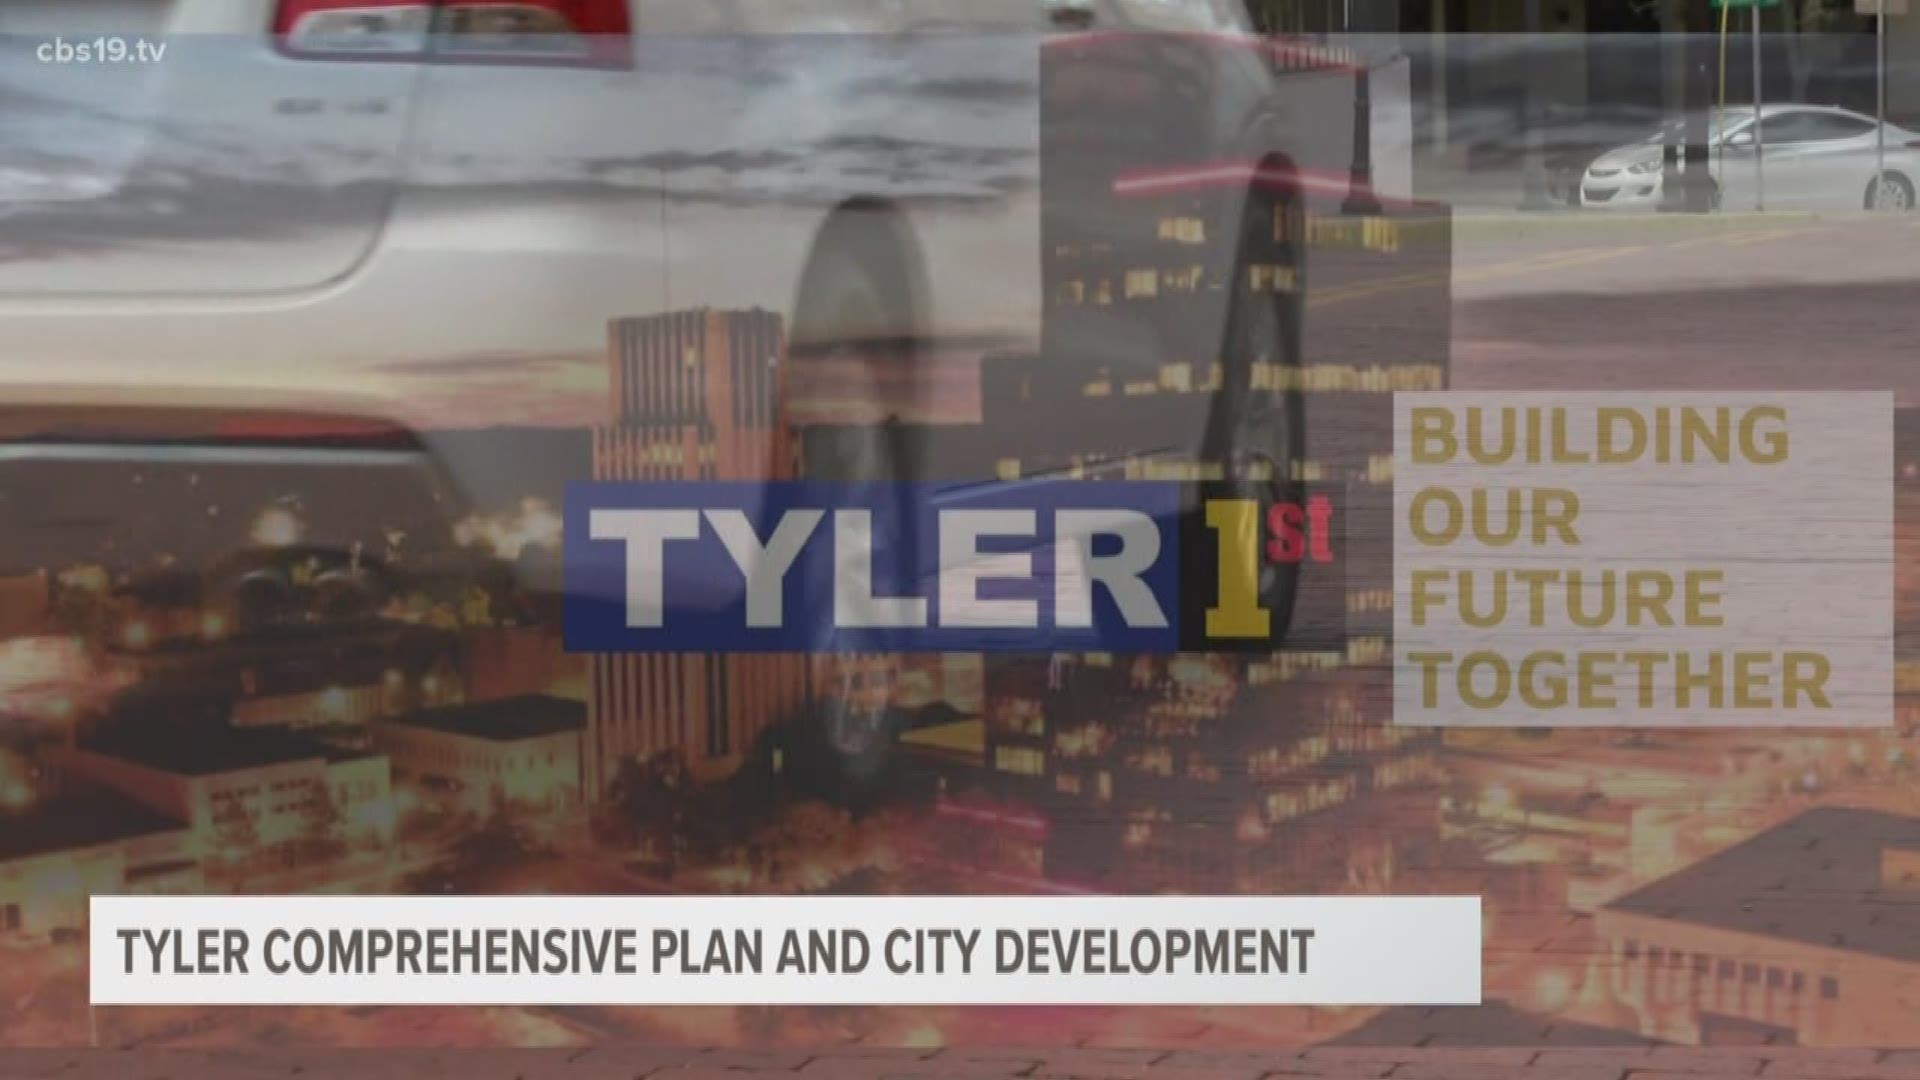 Officials say they approve multi-use development projects because it coincides with Tyler's 1st Comprehensive Plan.